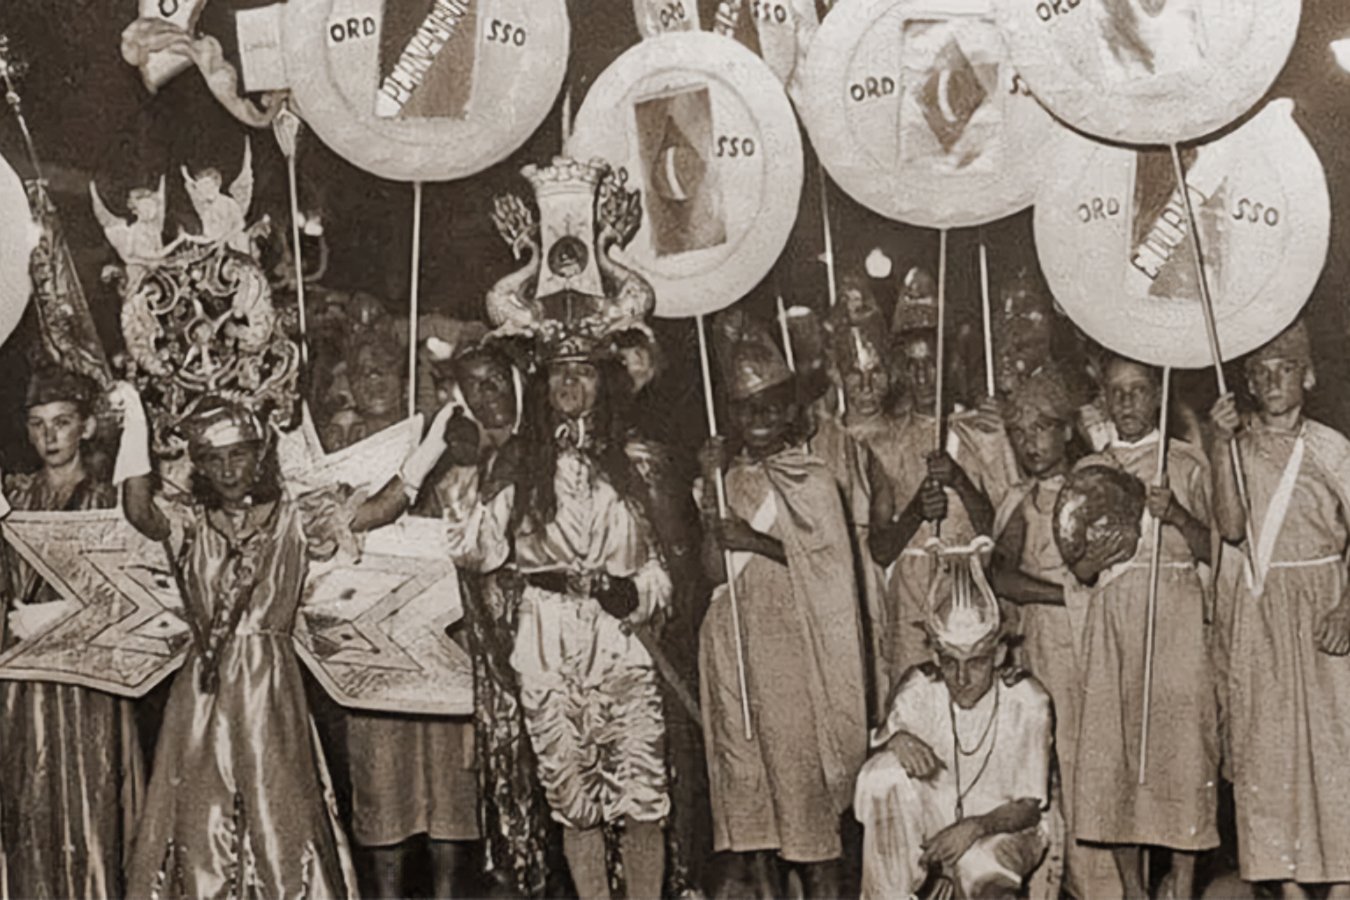 Members of Rancho Carnavalesco ready to take over the streets in 1938.